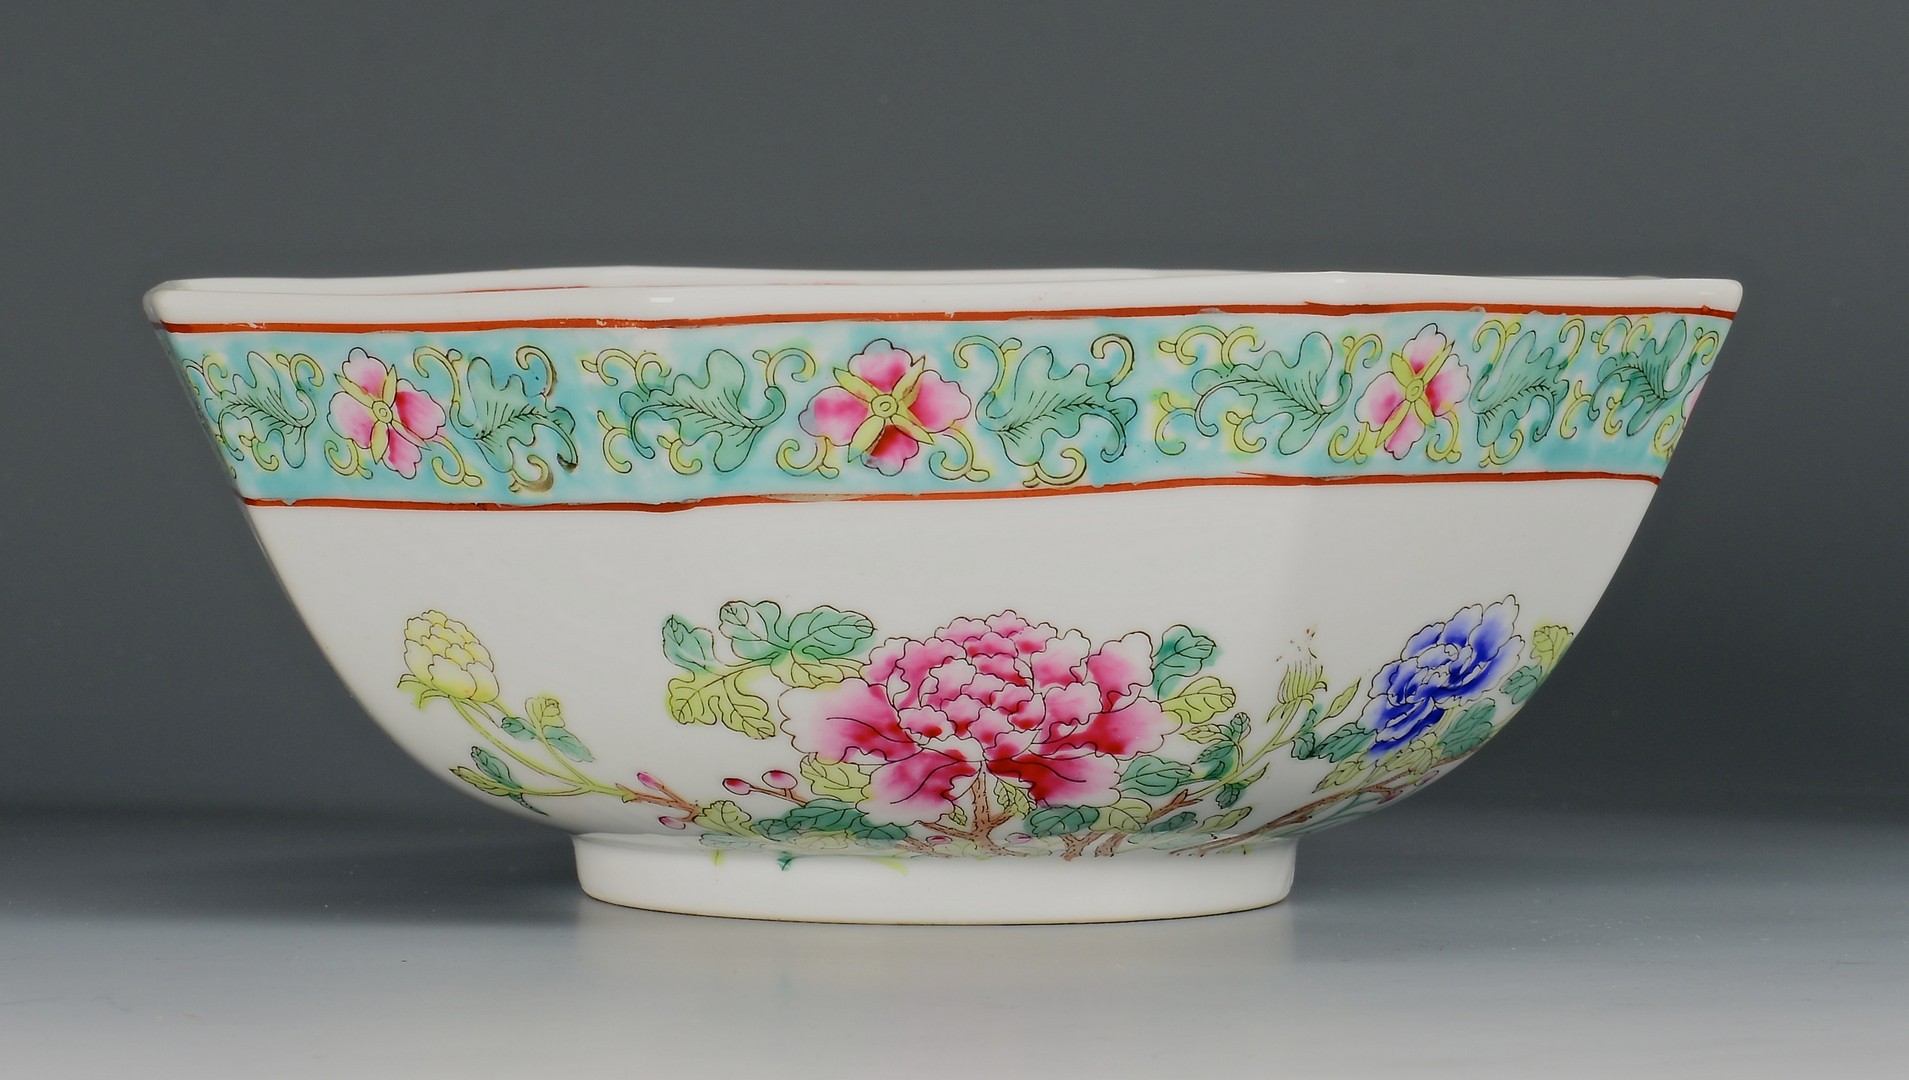 Lot 412: Asian bowl, cup, saucer and vase